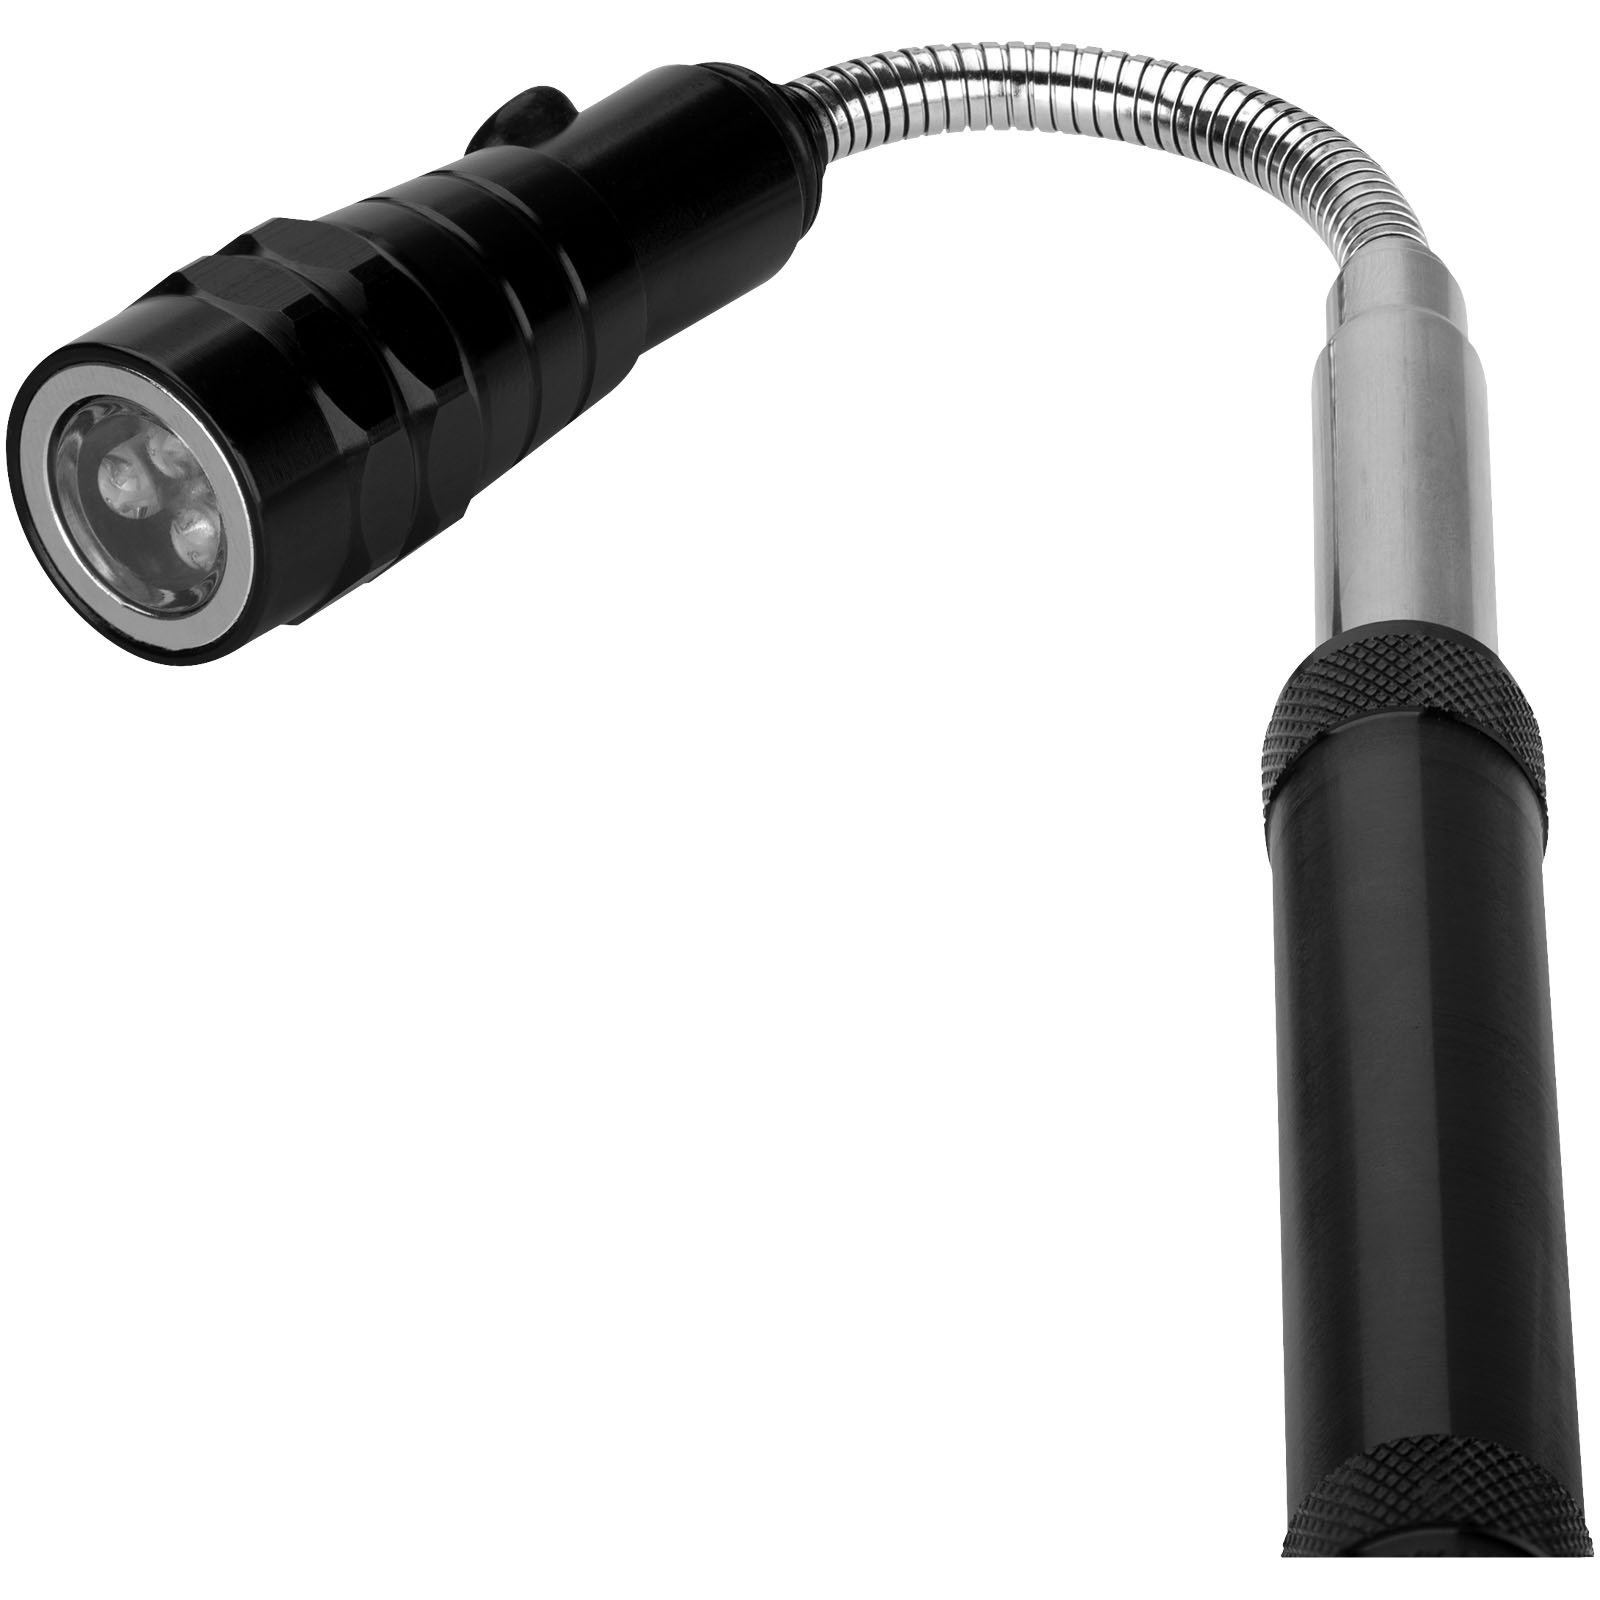 Advertising Lamps - Magnetica pick-up tool torch light - 5